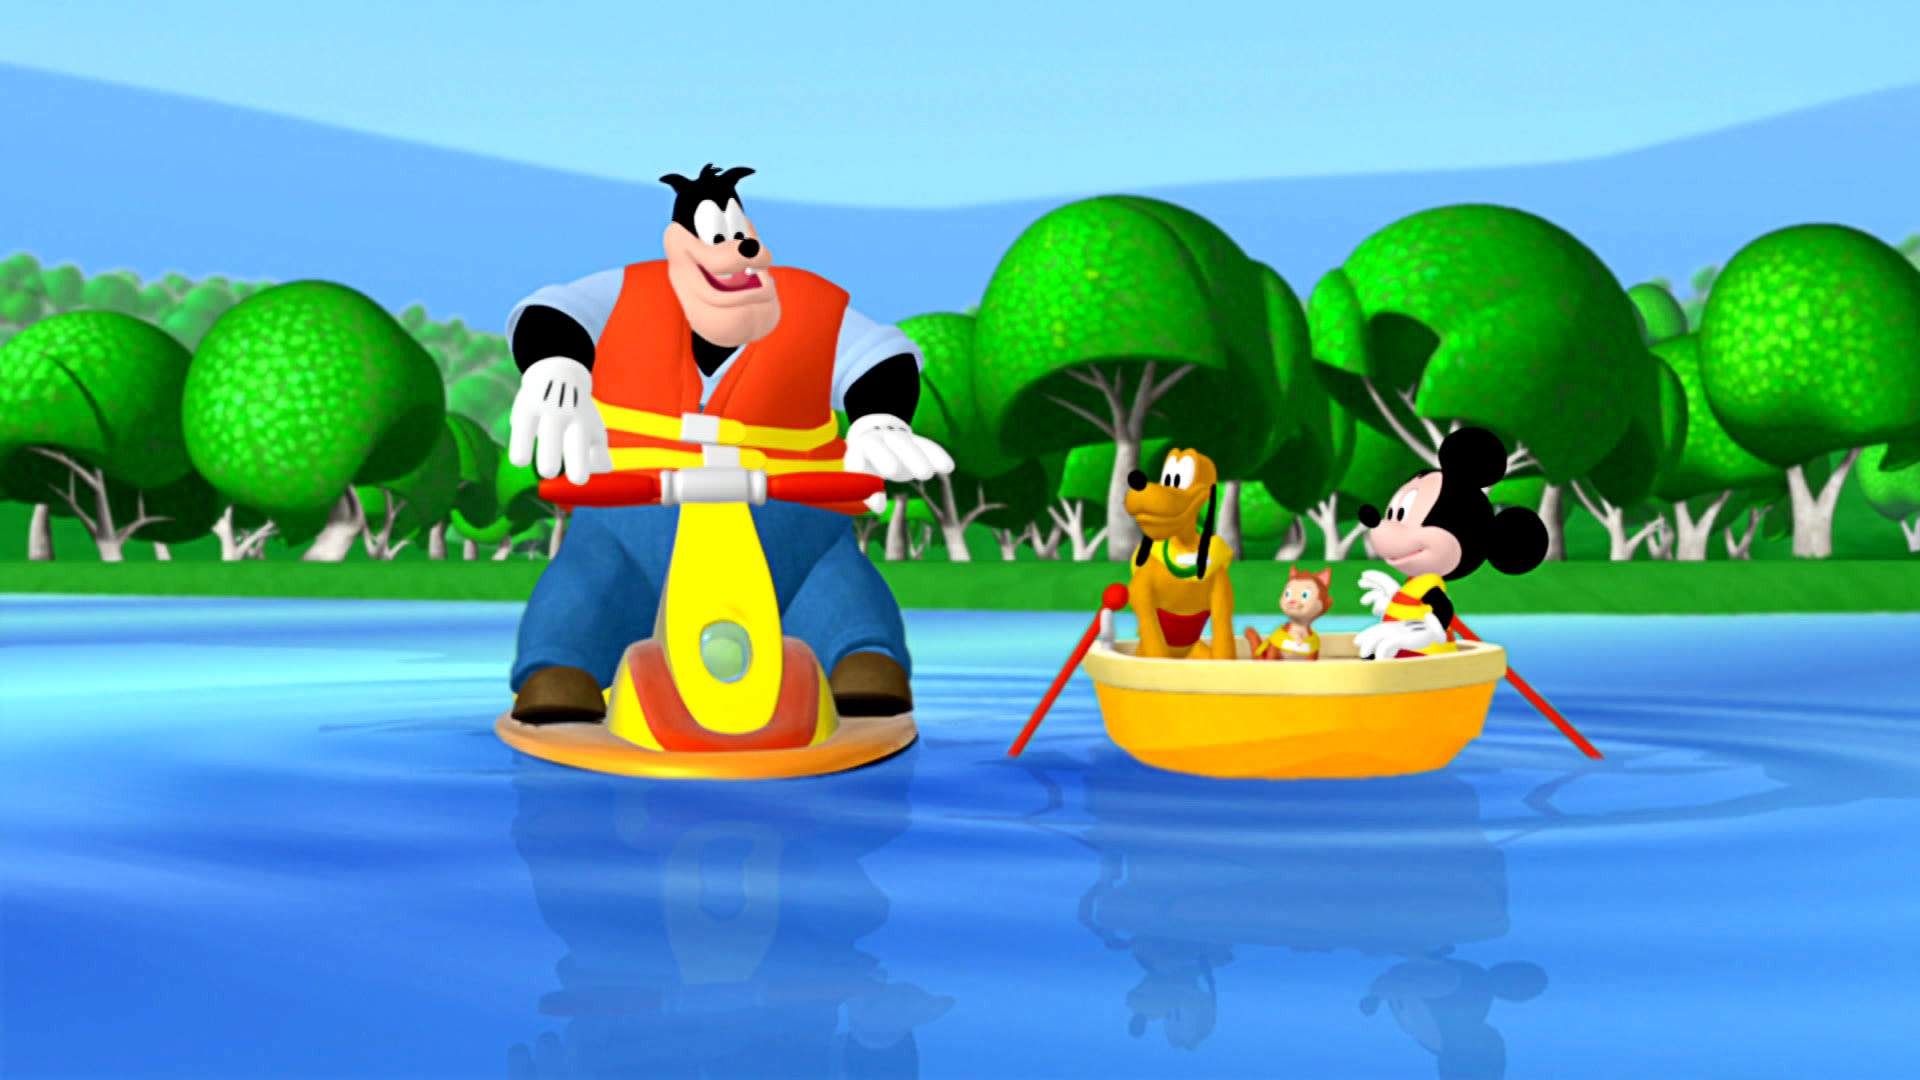 Watch Disney Mickey Mouse Clubhouse S1 Episode 5 on Disney+ Hotstar